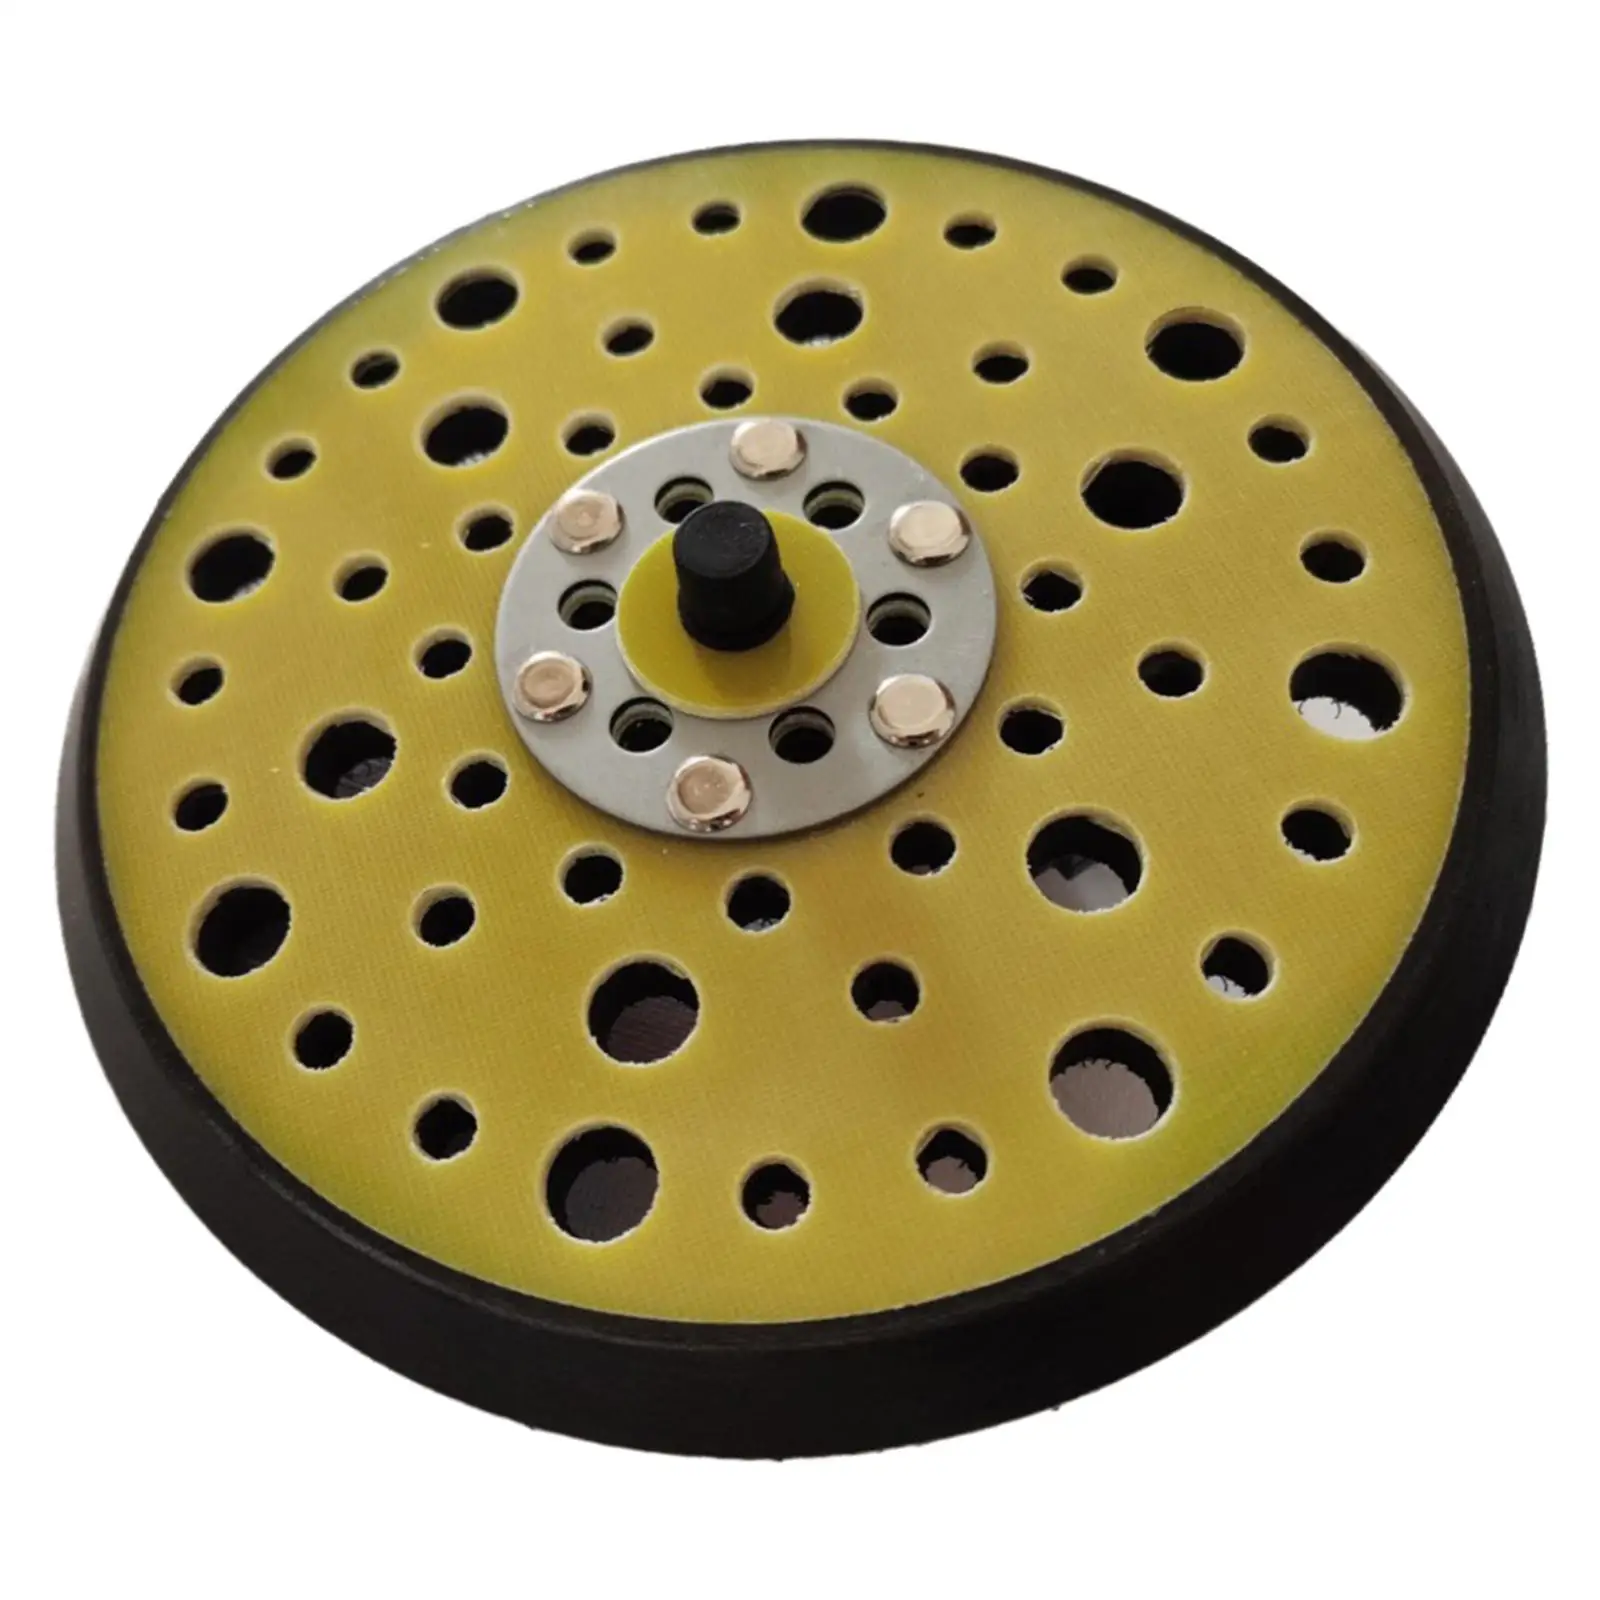 Sanding Backing Polishing Pad Disc Power Tool Accessory Accs for Woodworking